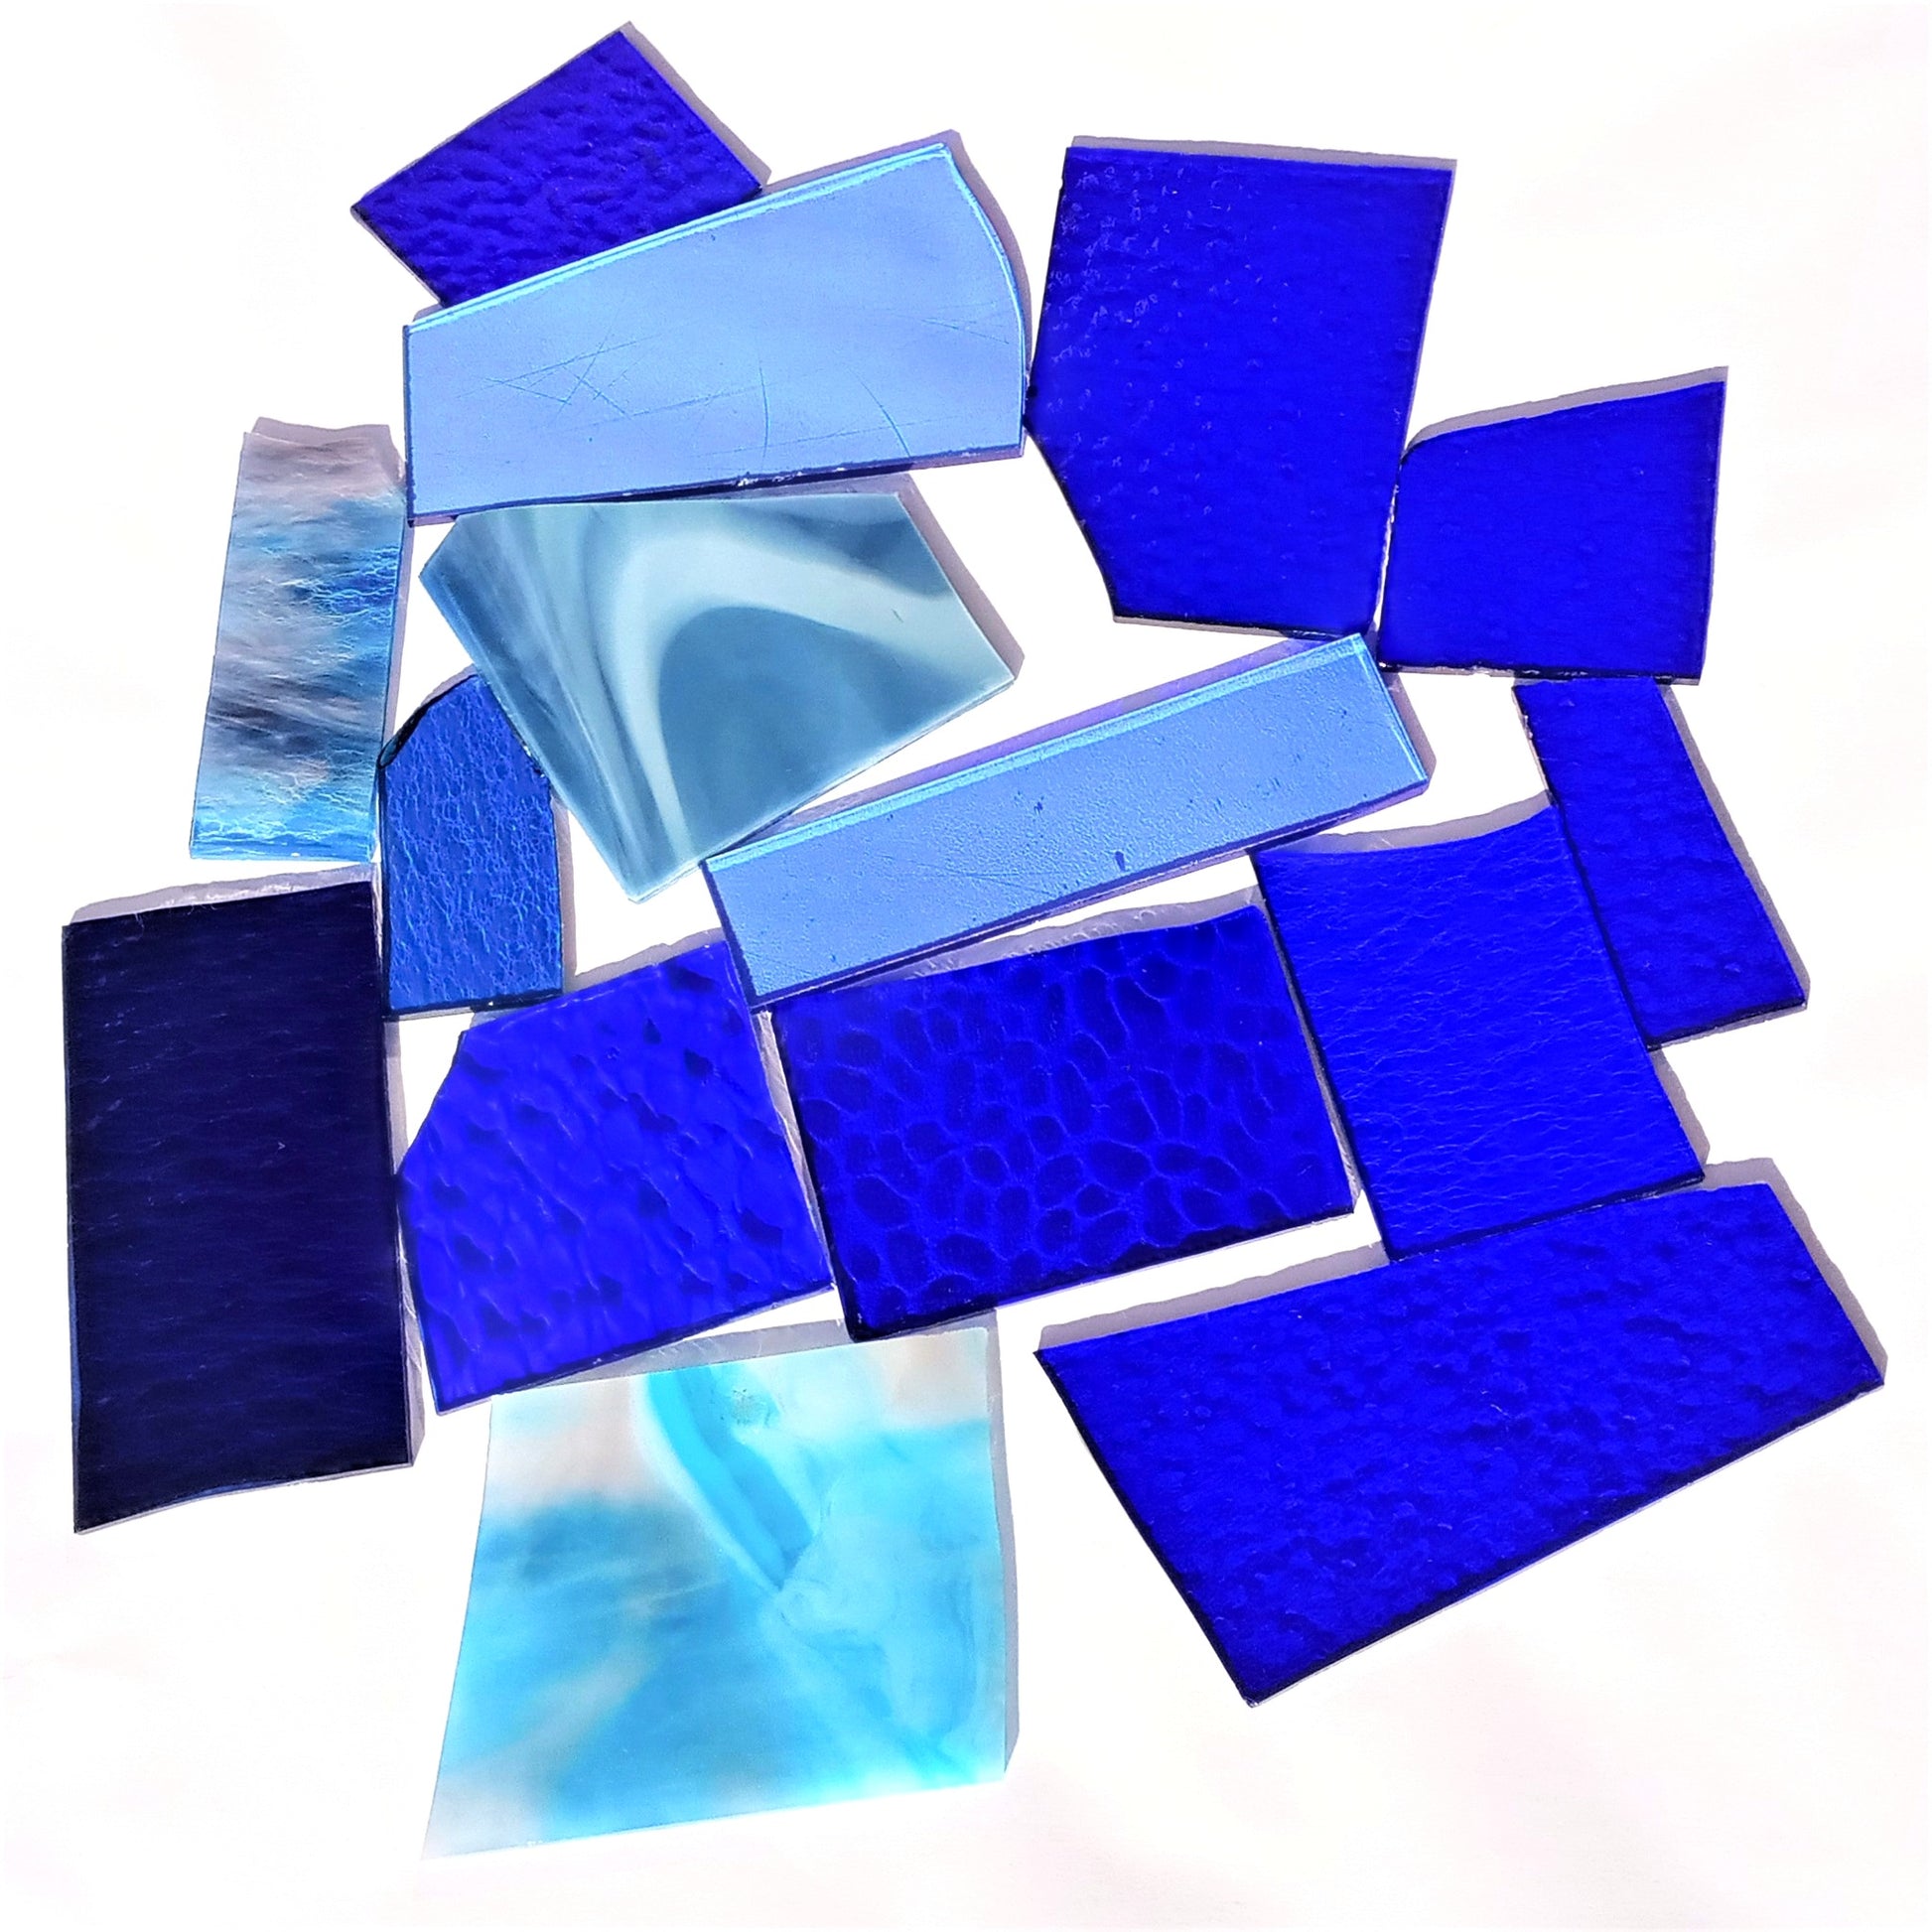 Blue Stained Glass Scraps, Curated 1 lb Package of Reclaimed Shop Scrap Glass in Shades of Blue